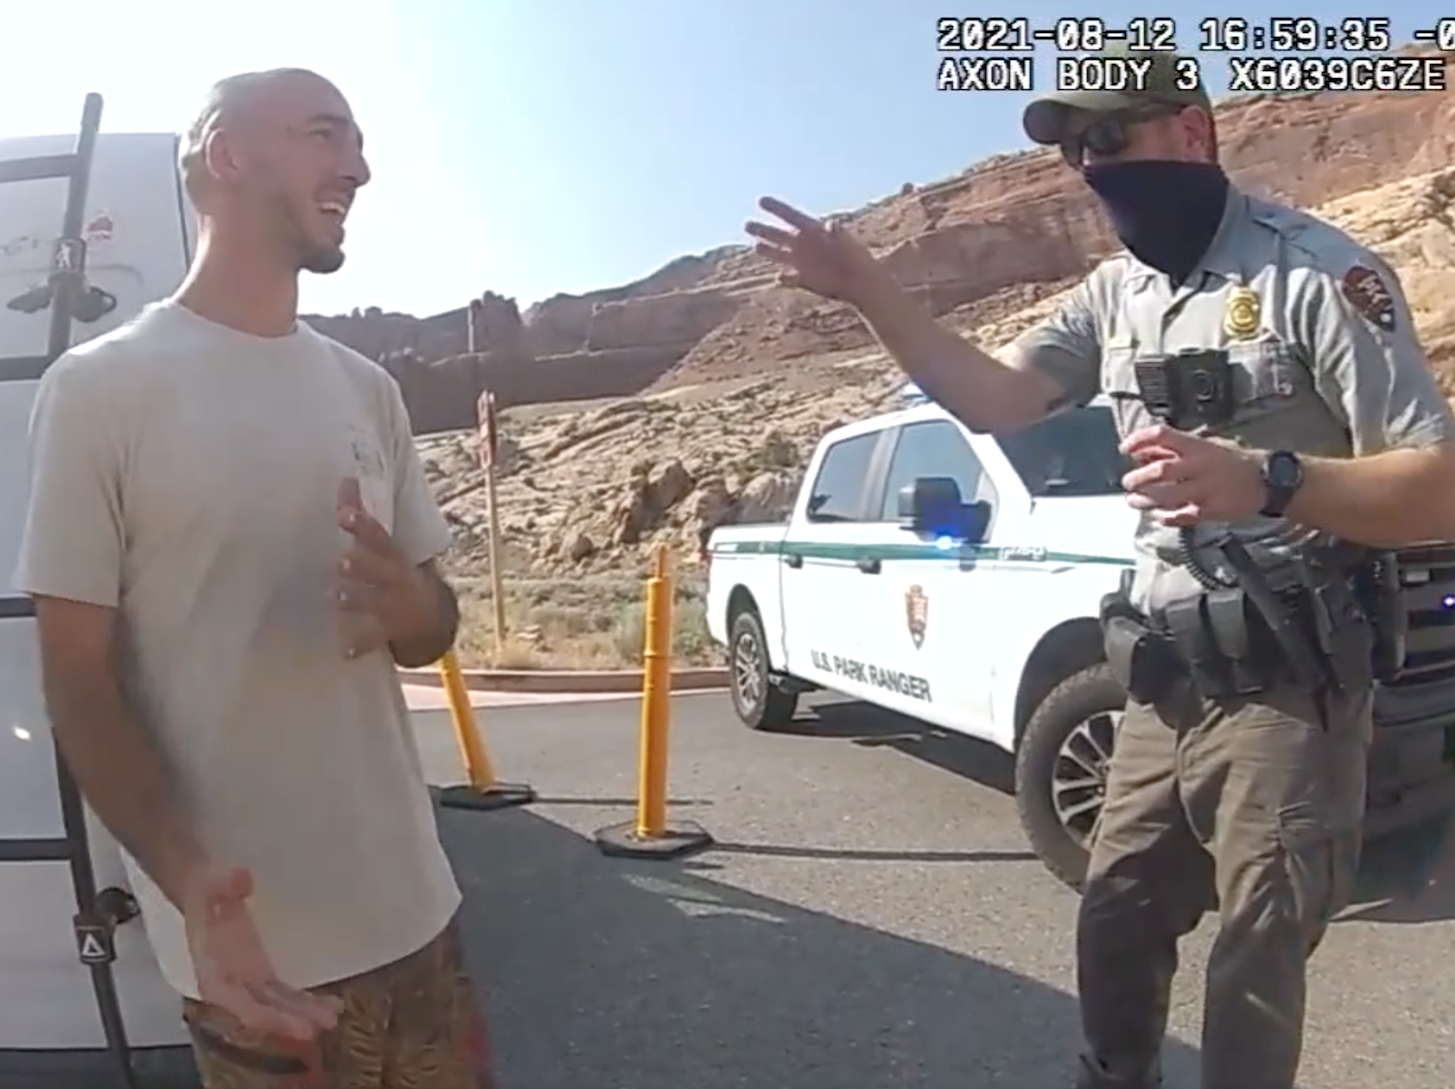 A screenshot from Utah police bodycam footage showing Brian Laundrie talking to a police officer.